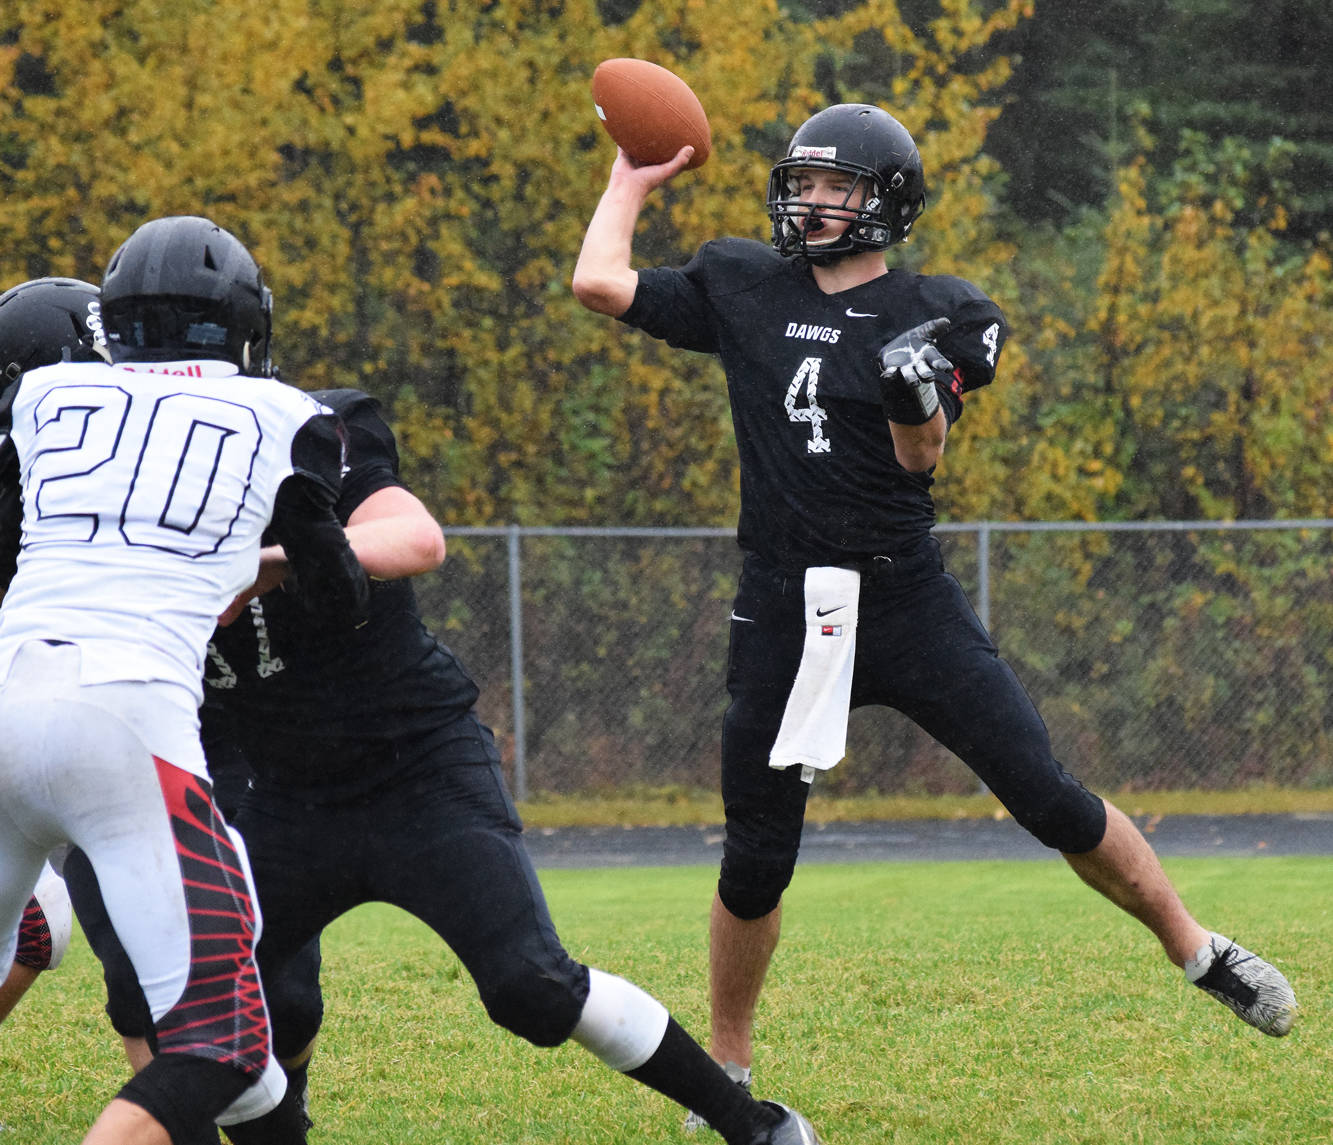 Nikiski sophomore Michael Eiter delivers a pass against the Eielson rush Sept. 22 at Nikiski High School. (Photo by Joey Klecka/Peninsula Clarion)